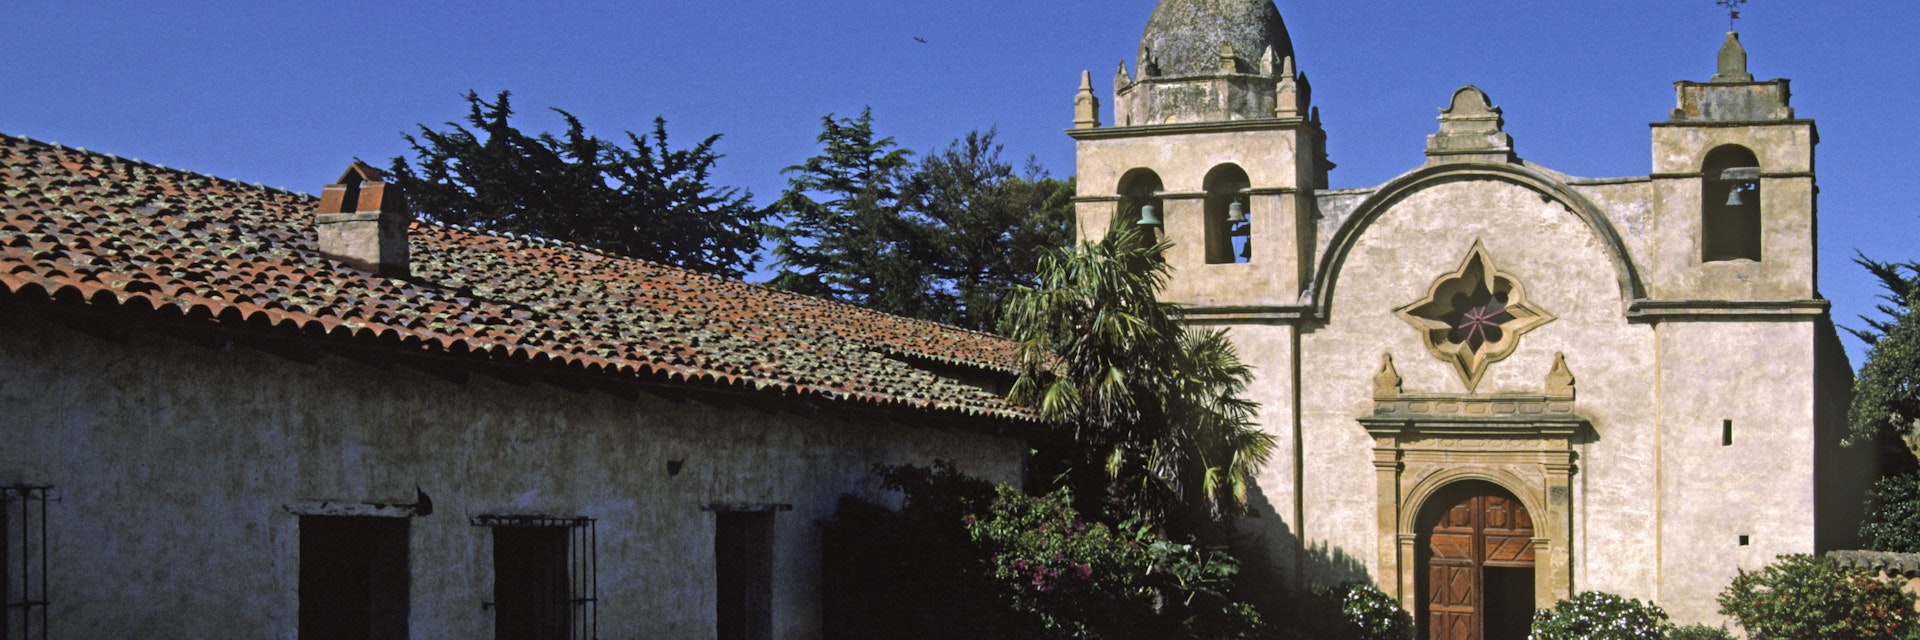 Father Junipero Serra Founded The Carmel Mission With The Help Of The Local Indian Population, Carmel, California. (Photo By: Education Images/UIG via Getty Images)